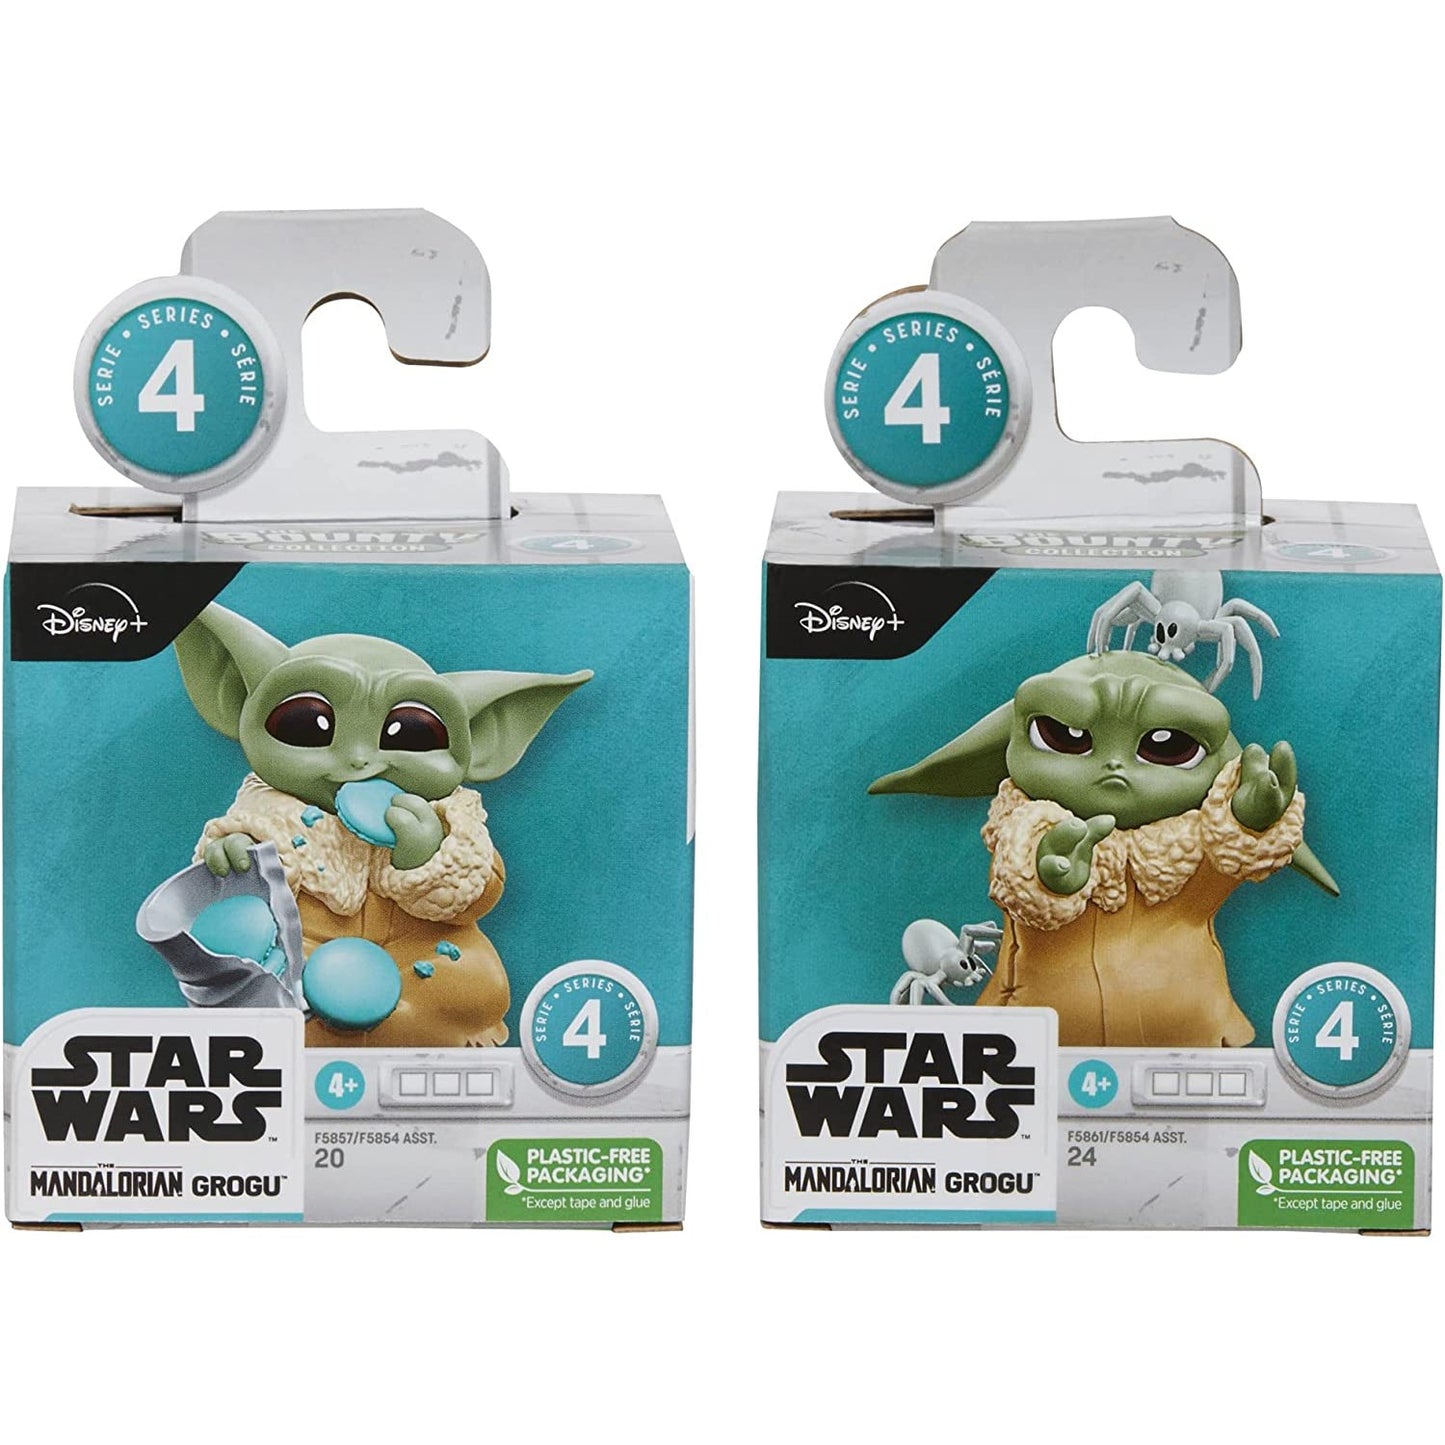 A set of 2 figures in packaging of Grogu in “Pesky Spider” and “Cookie Eating” poses.